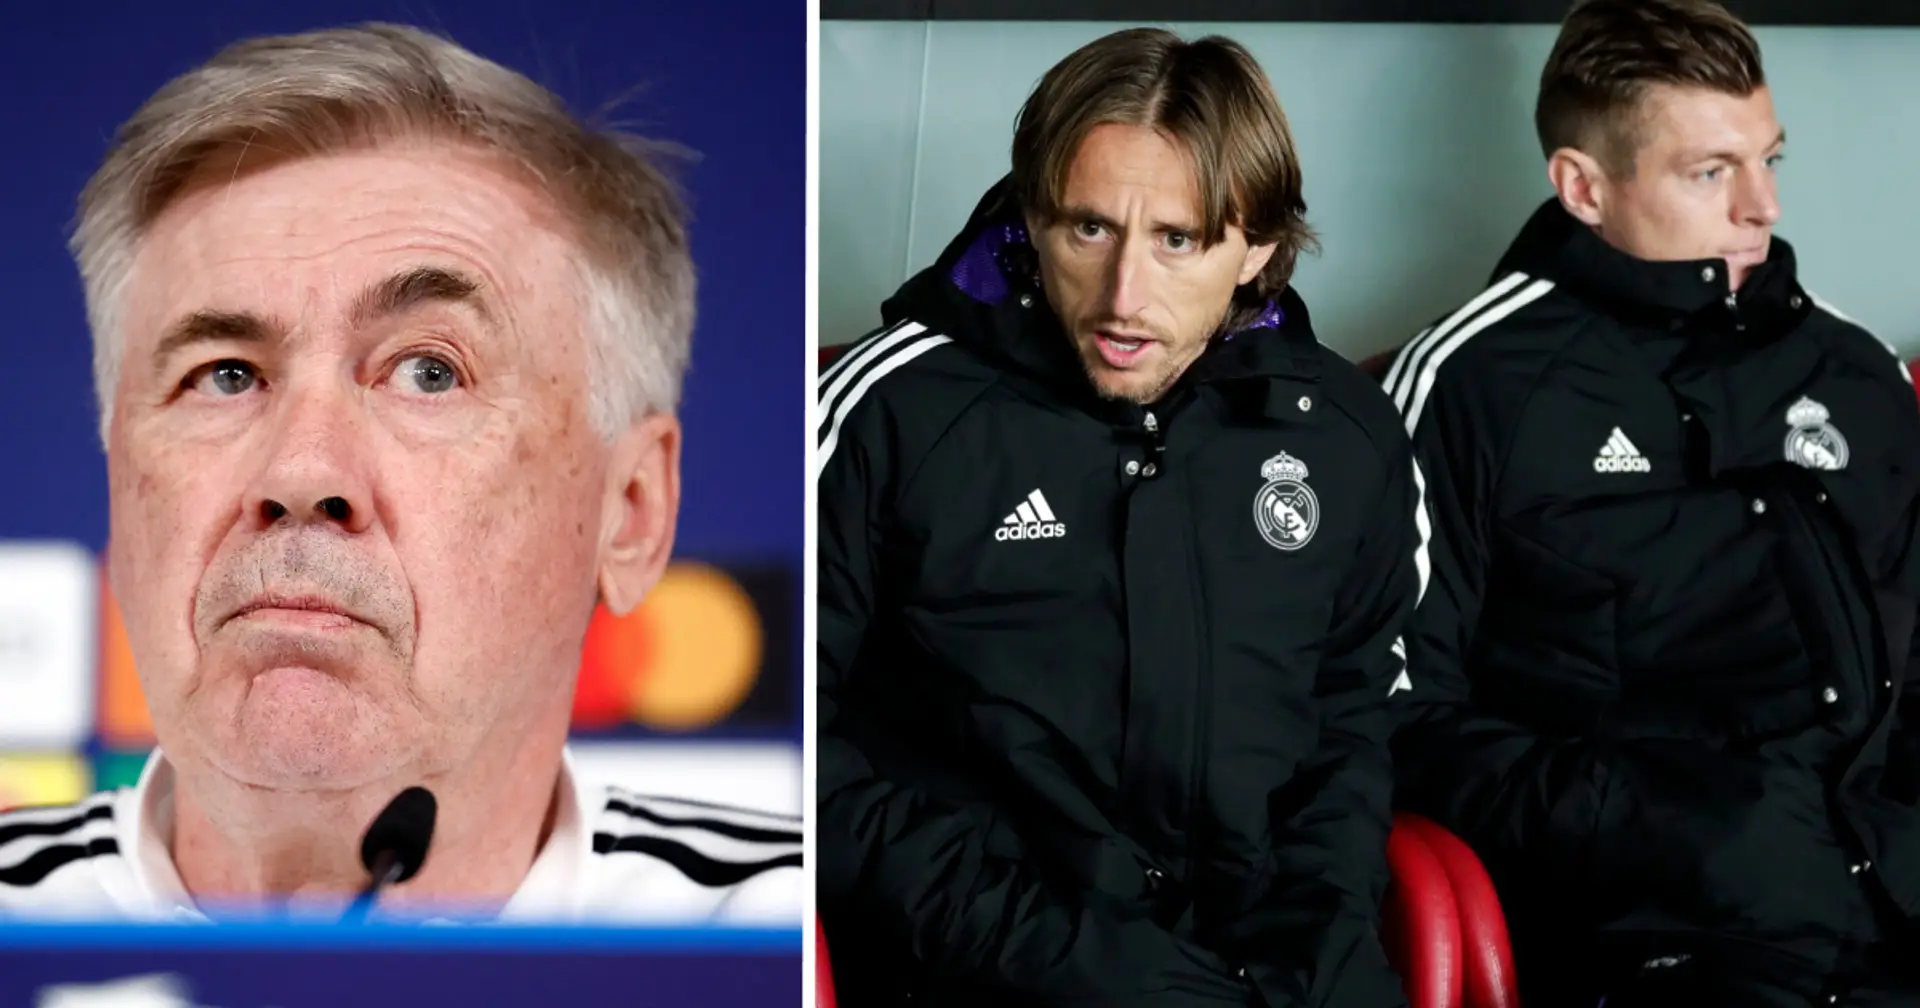 2 Real Madrid players 'unhappy' over lack of playing time under Ancelotti, not Kroos and Modric